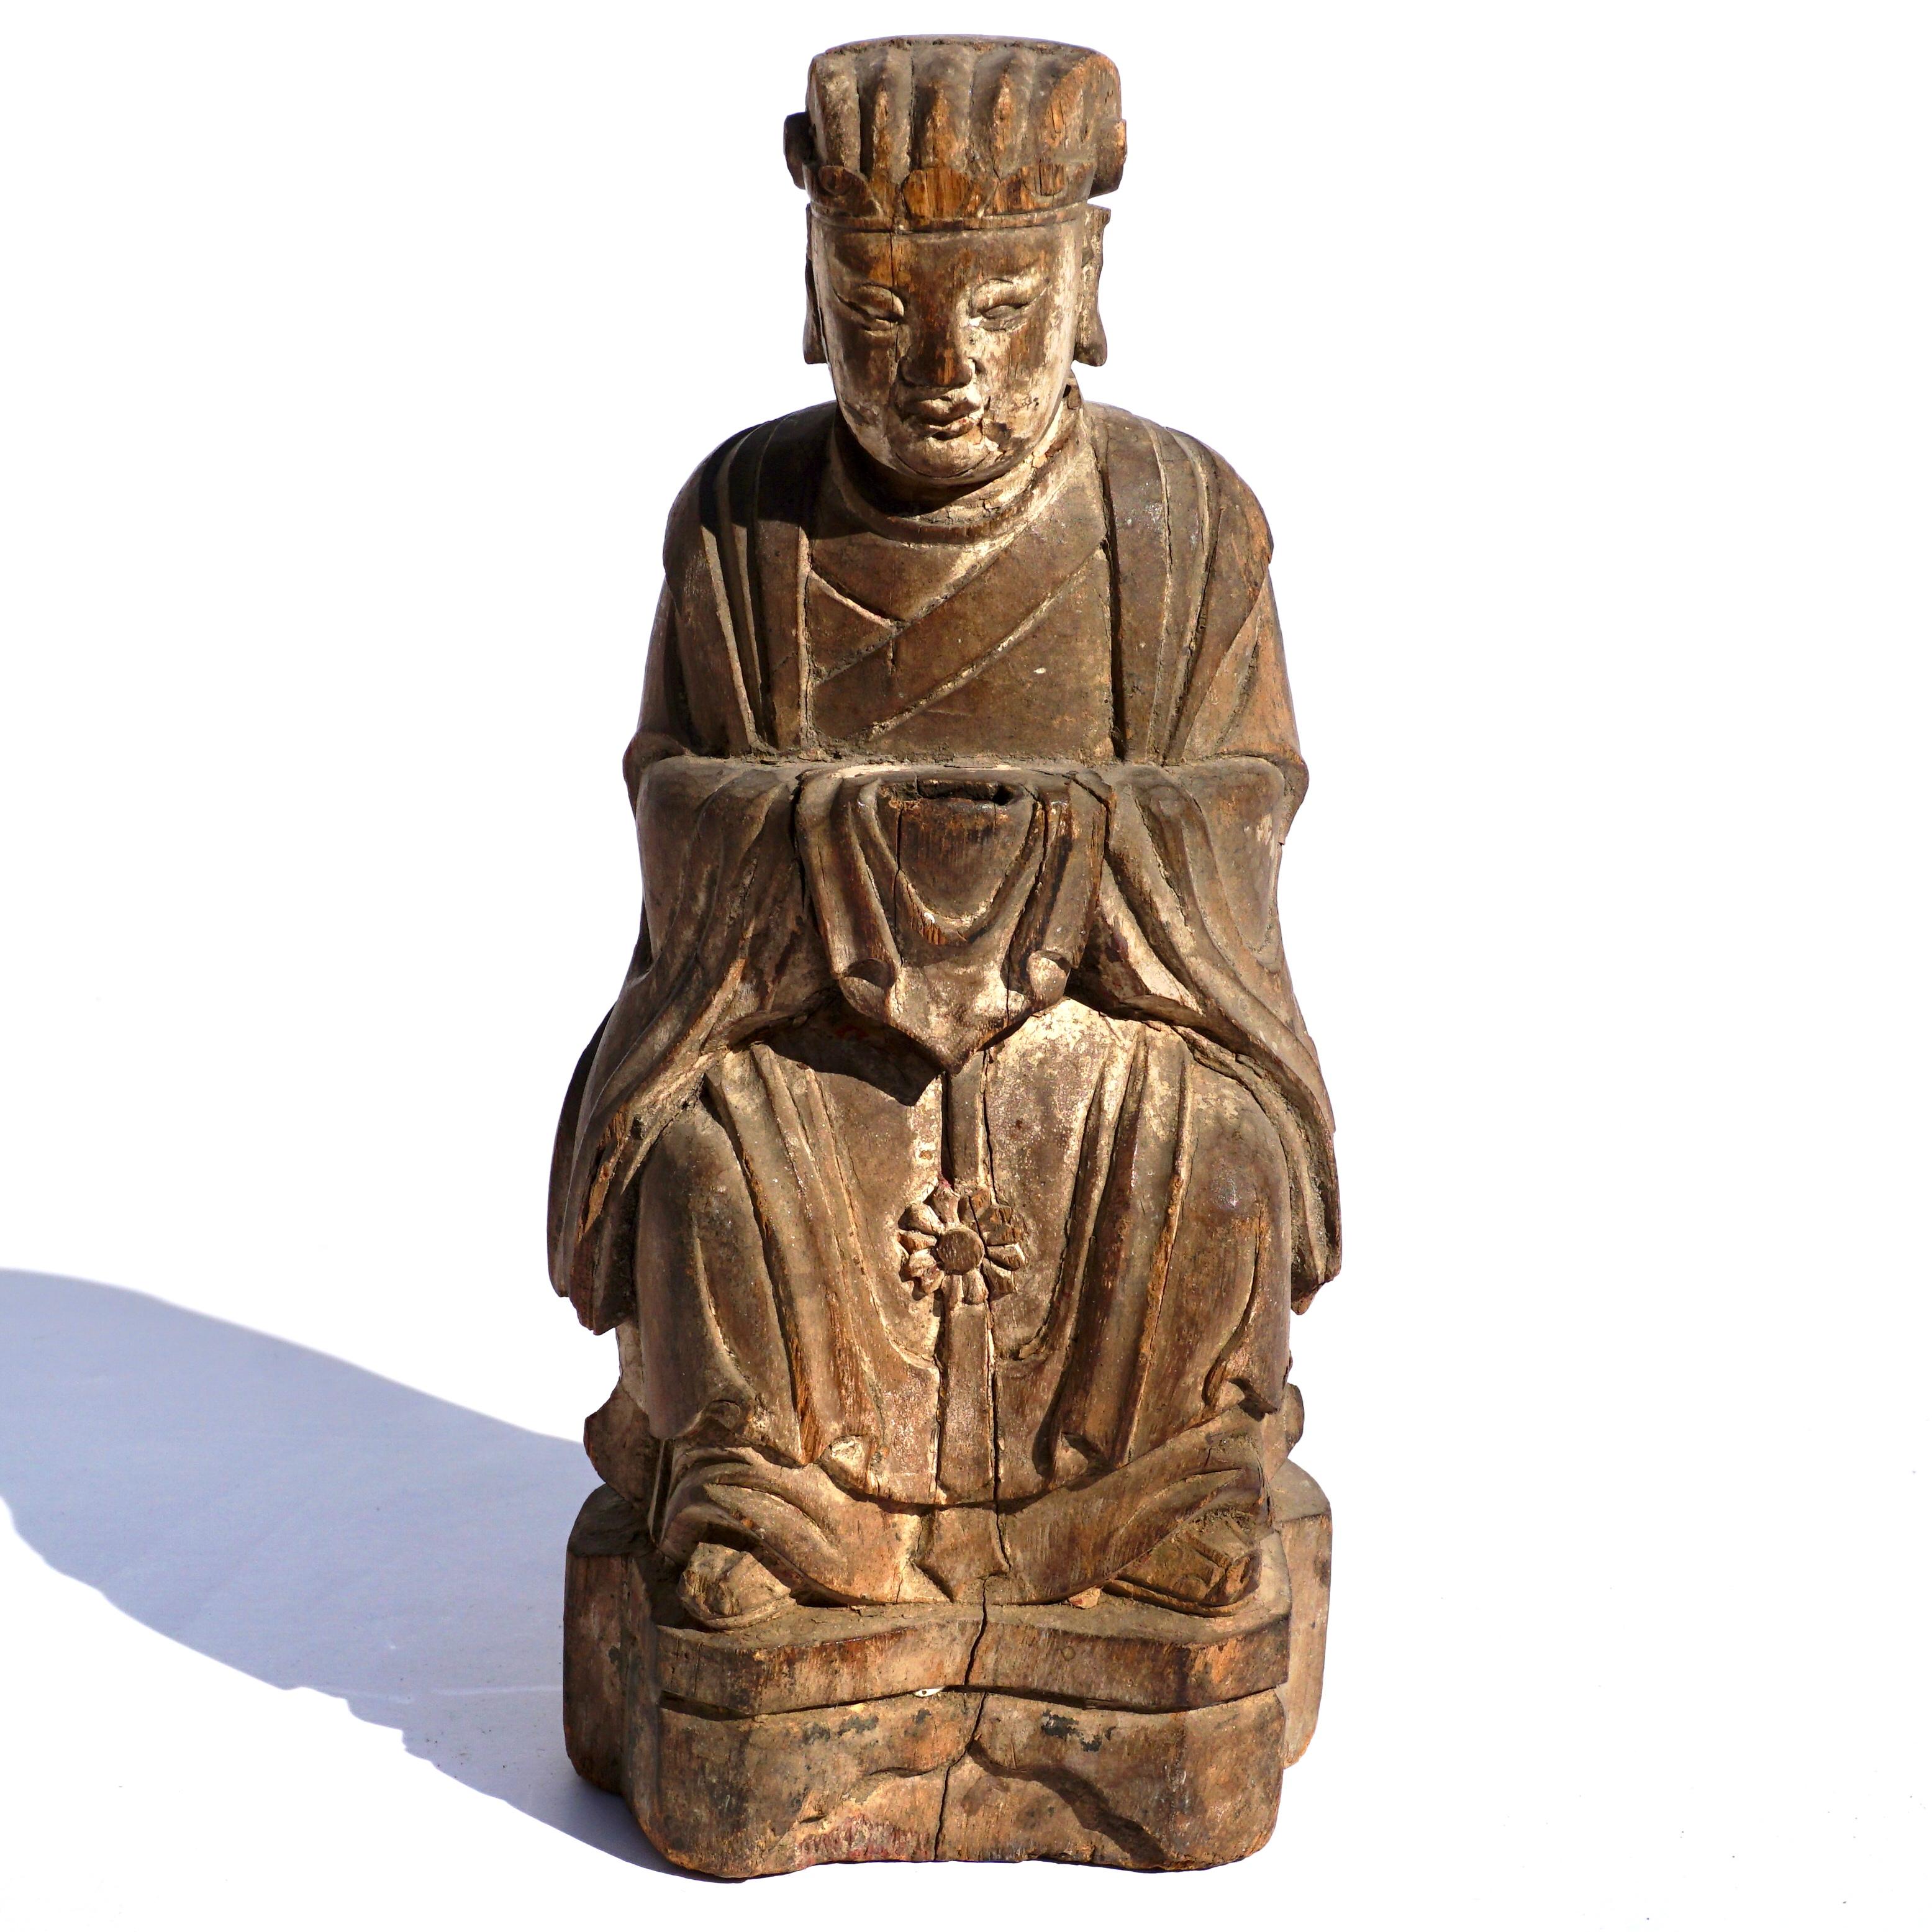 A beautifully wood carved figure of a seated Buddha. Seated with slowing robe with traces of white polychrome mostly on head and neck. Prayer compartment in back. Figures done in this period regularly were modeled into monks and immortals. This